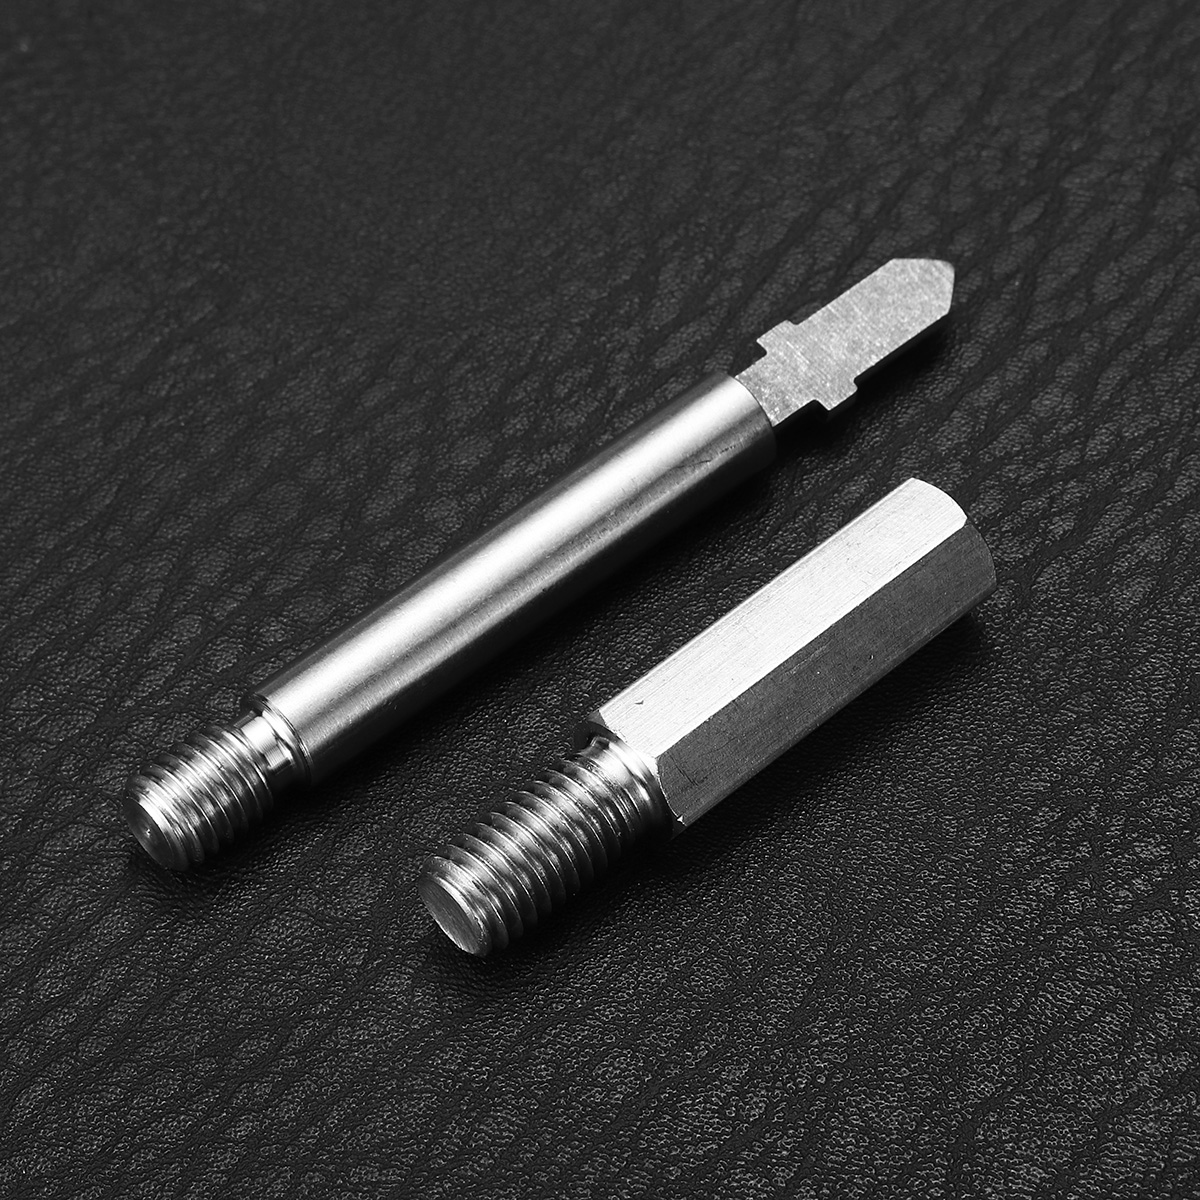 30mm75mm-Massage-Adapter-Attachment-Extended-Rod-For-Jigsaw-Percussion-Massager-1435069